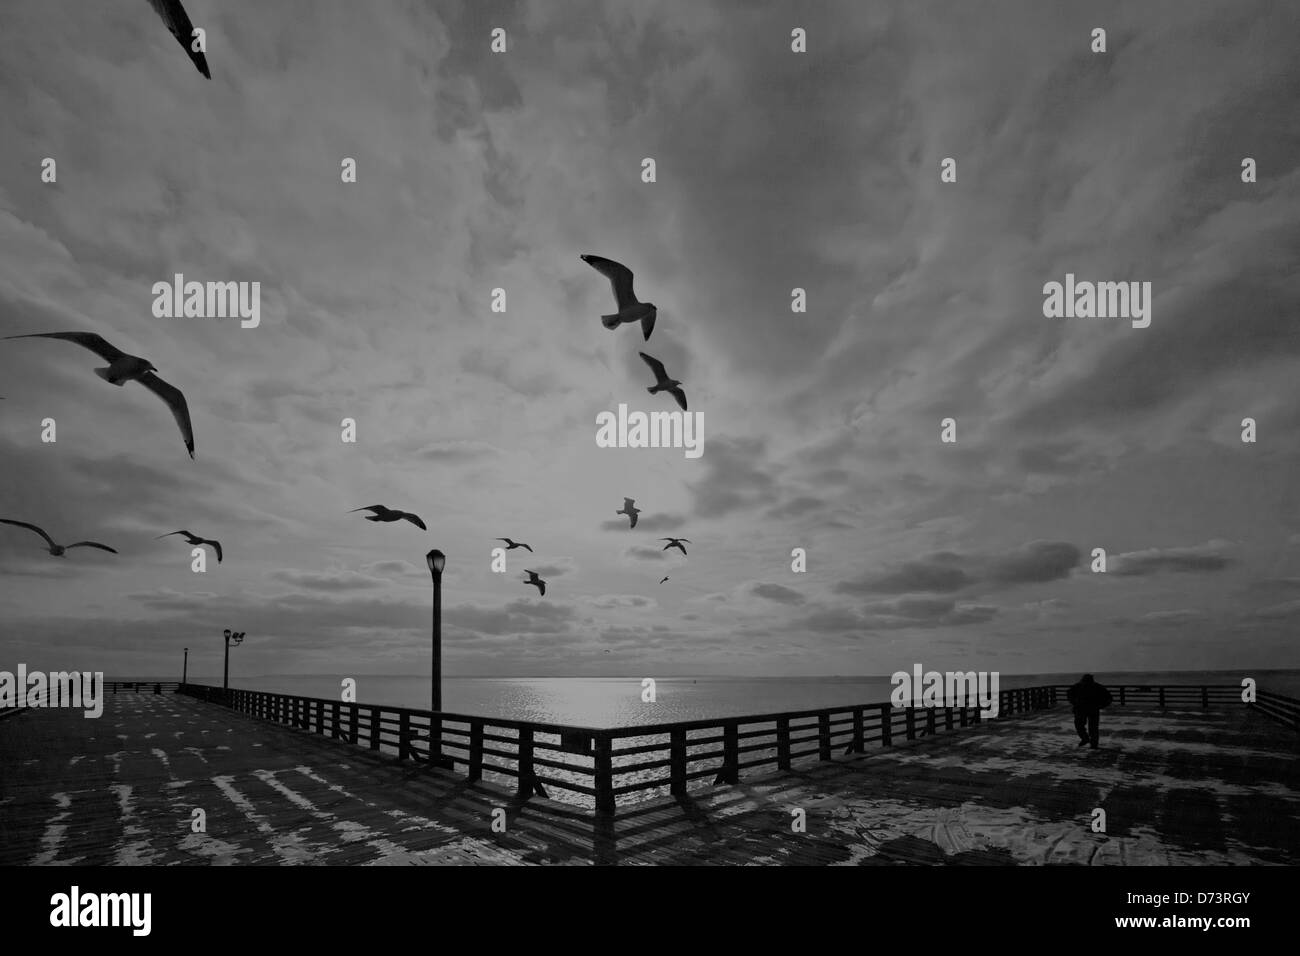 birds flying, clouds, sadness, solitude, pier, seagulls, silhouette Stock Photo